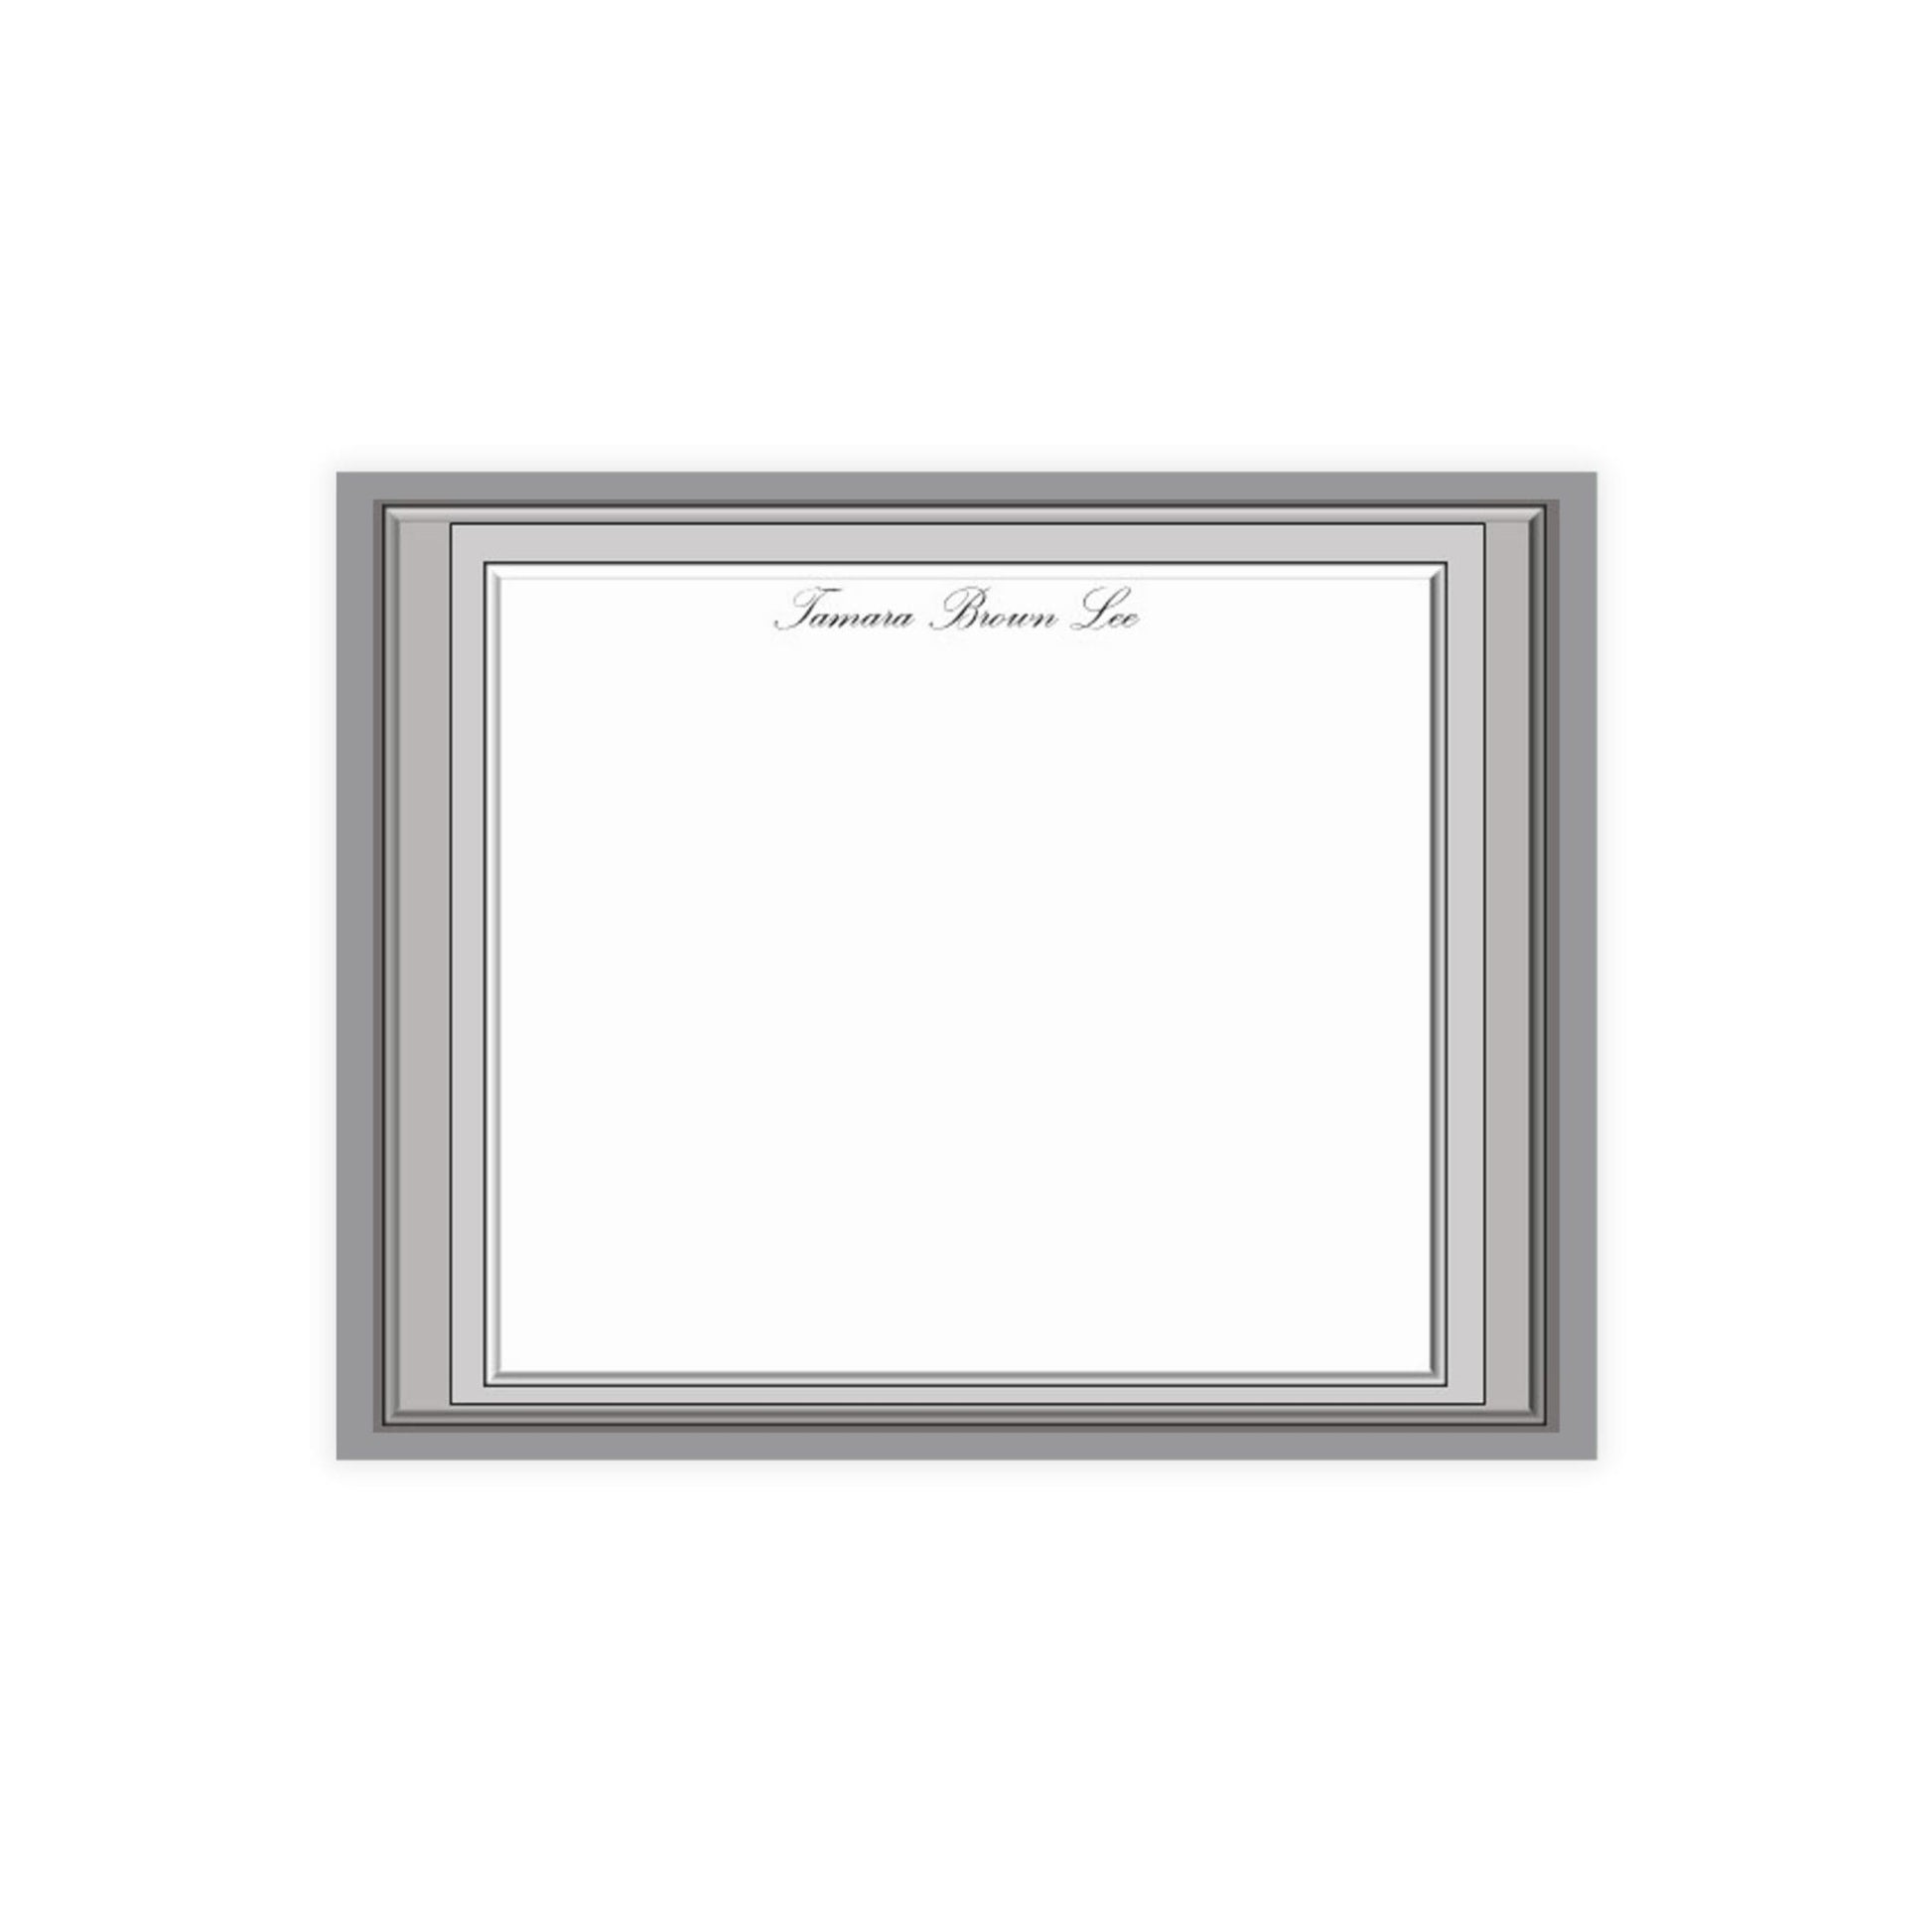 Personalized Note Card: Add a Personal Touch with Customized Stationery for Every Occasion. Shades of Gray Notecard